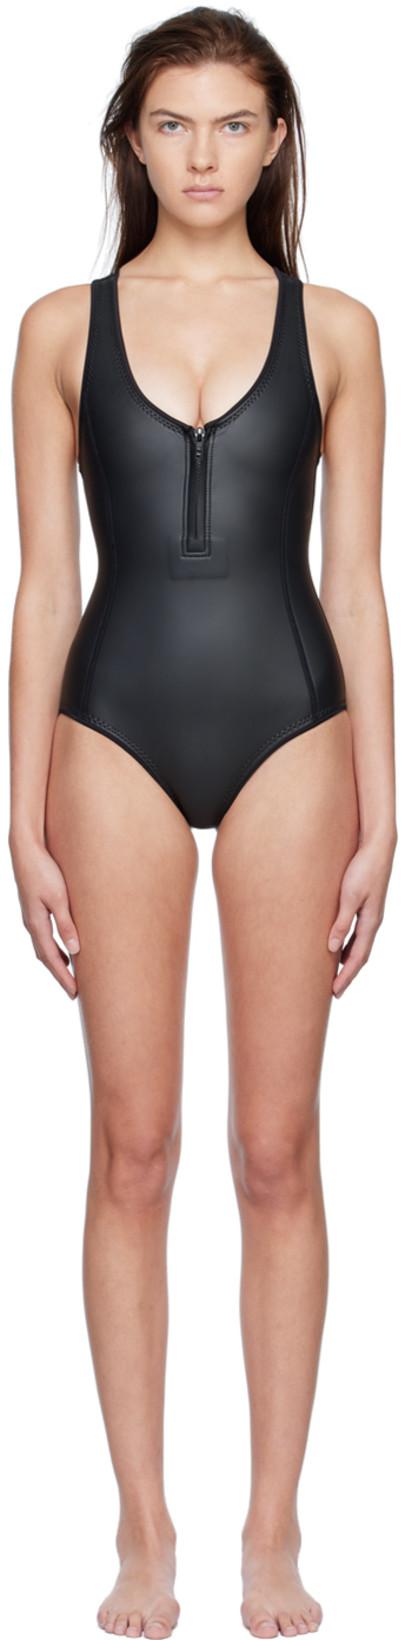 Black Elle One-Piece Swimsuit by ABYSSE